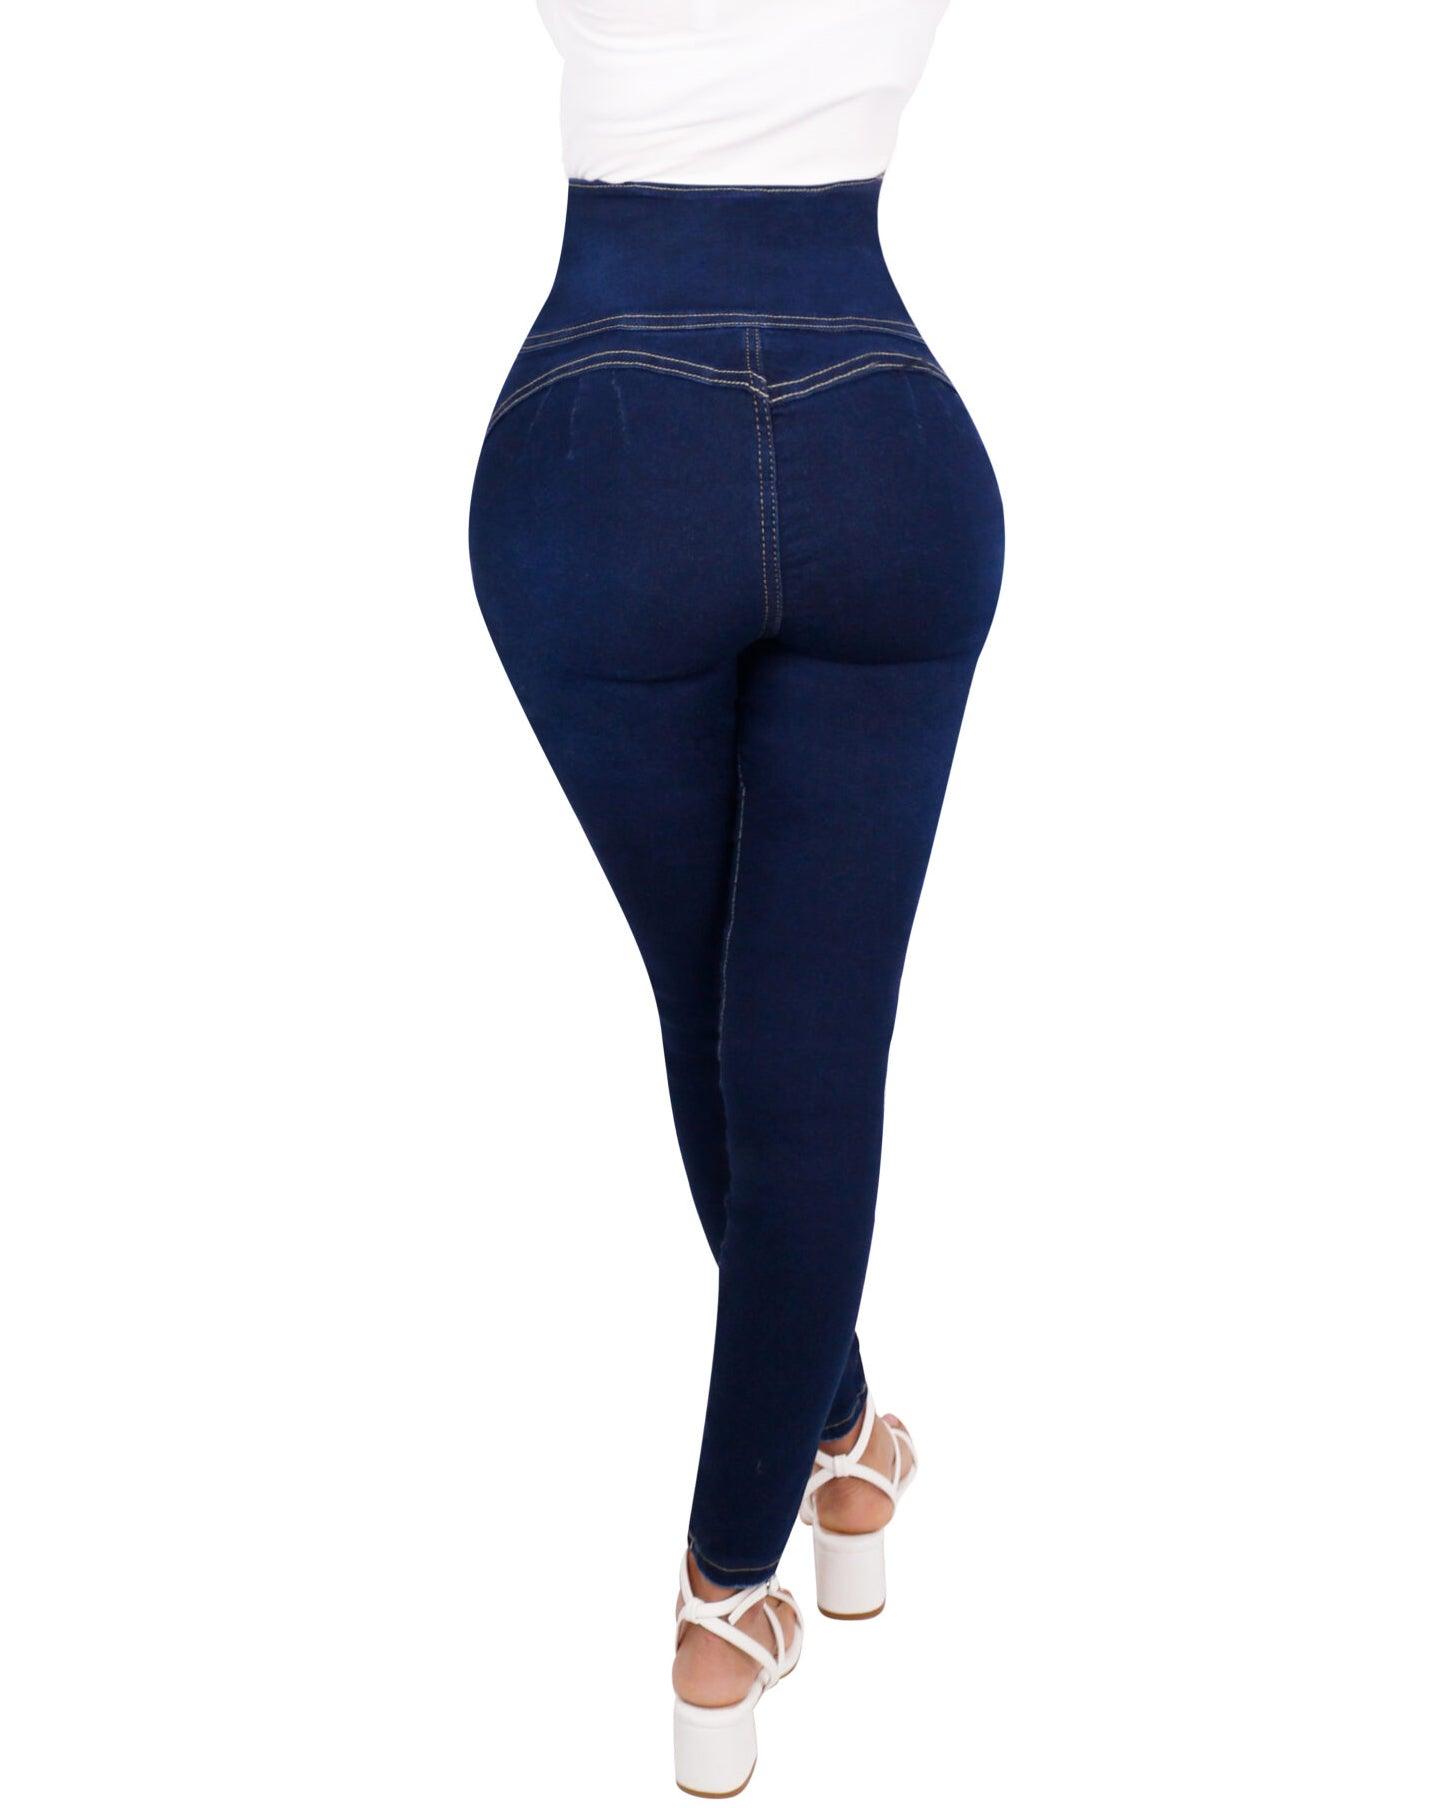 Wishe Butt Lifting Curvy Jeans High Waist Stretchy Jeans